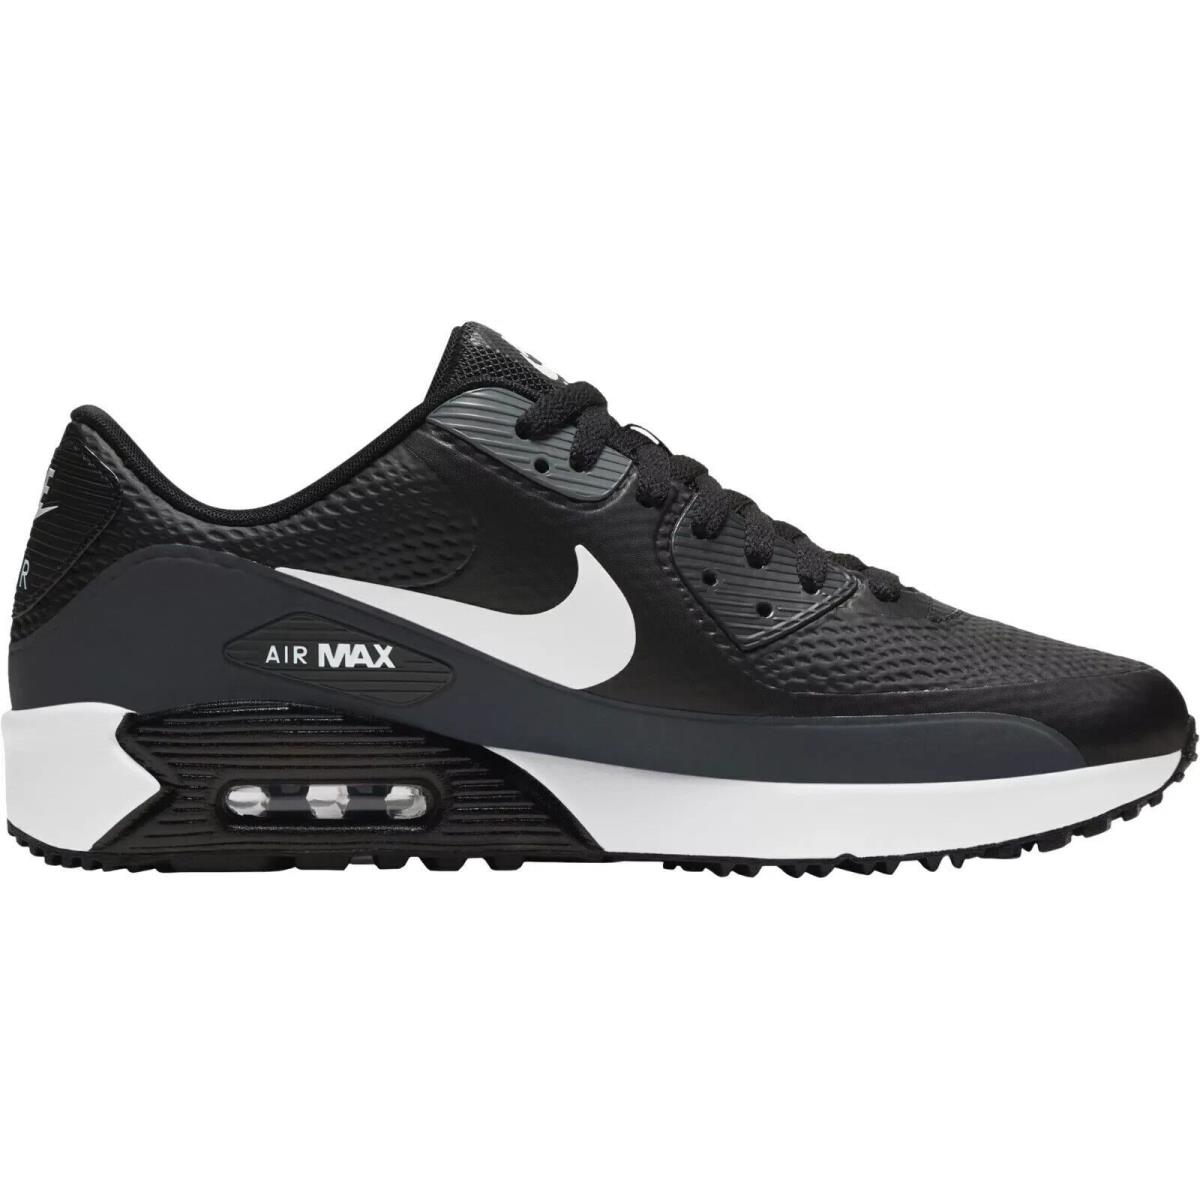 Golf Nike Air Max 90 G Men`s Shoes All Colors US Szs 7-13 Black/Anthracite/Cool Grey/White